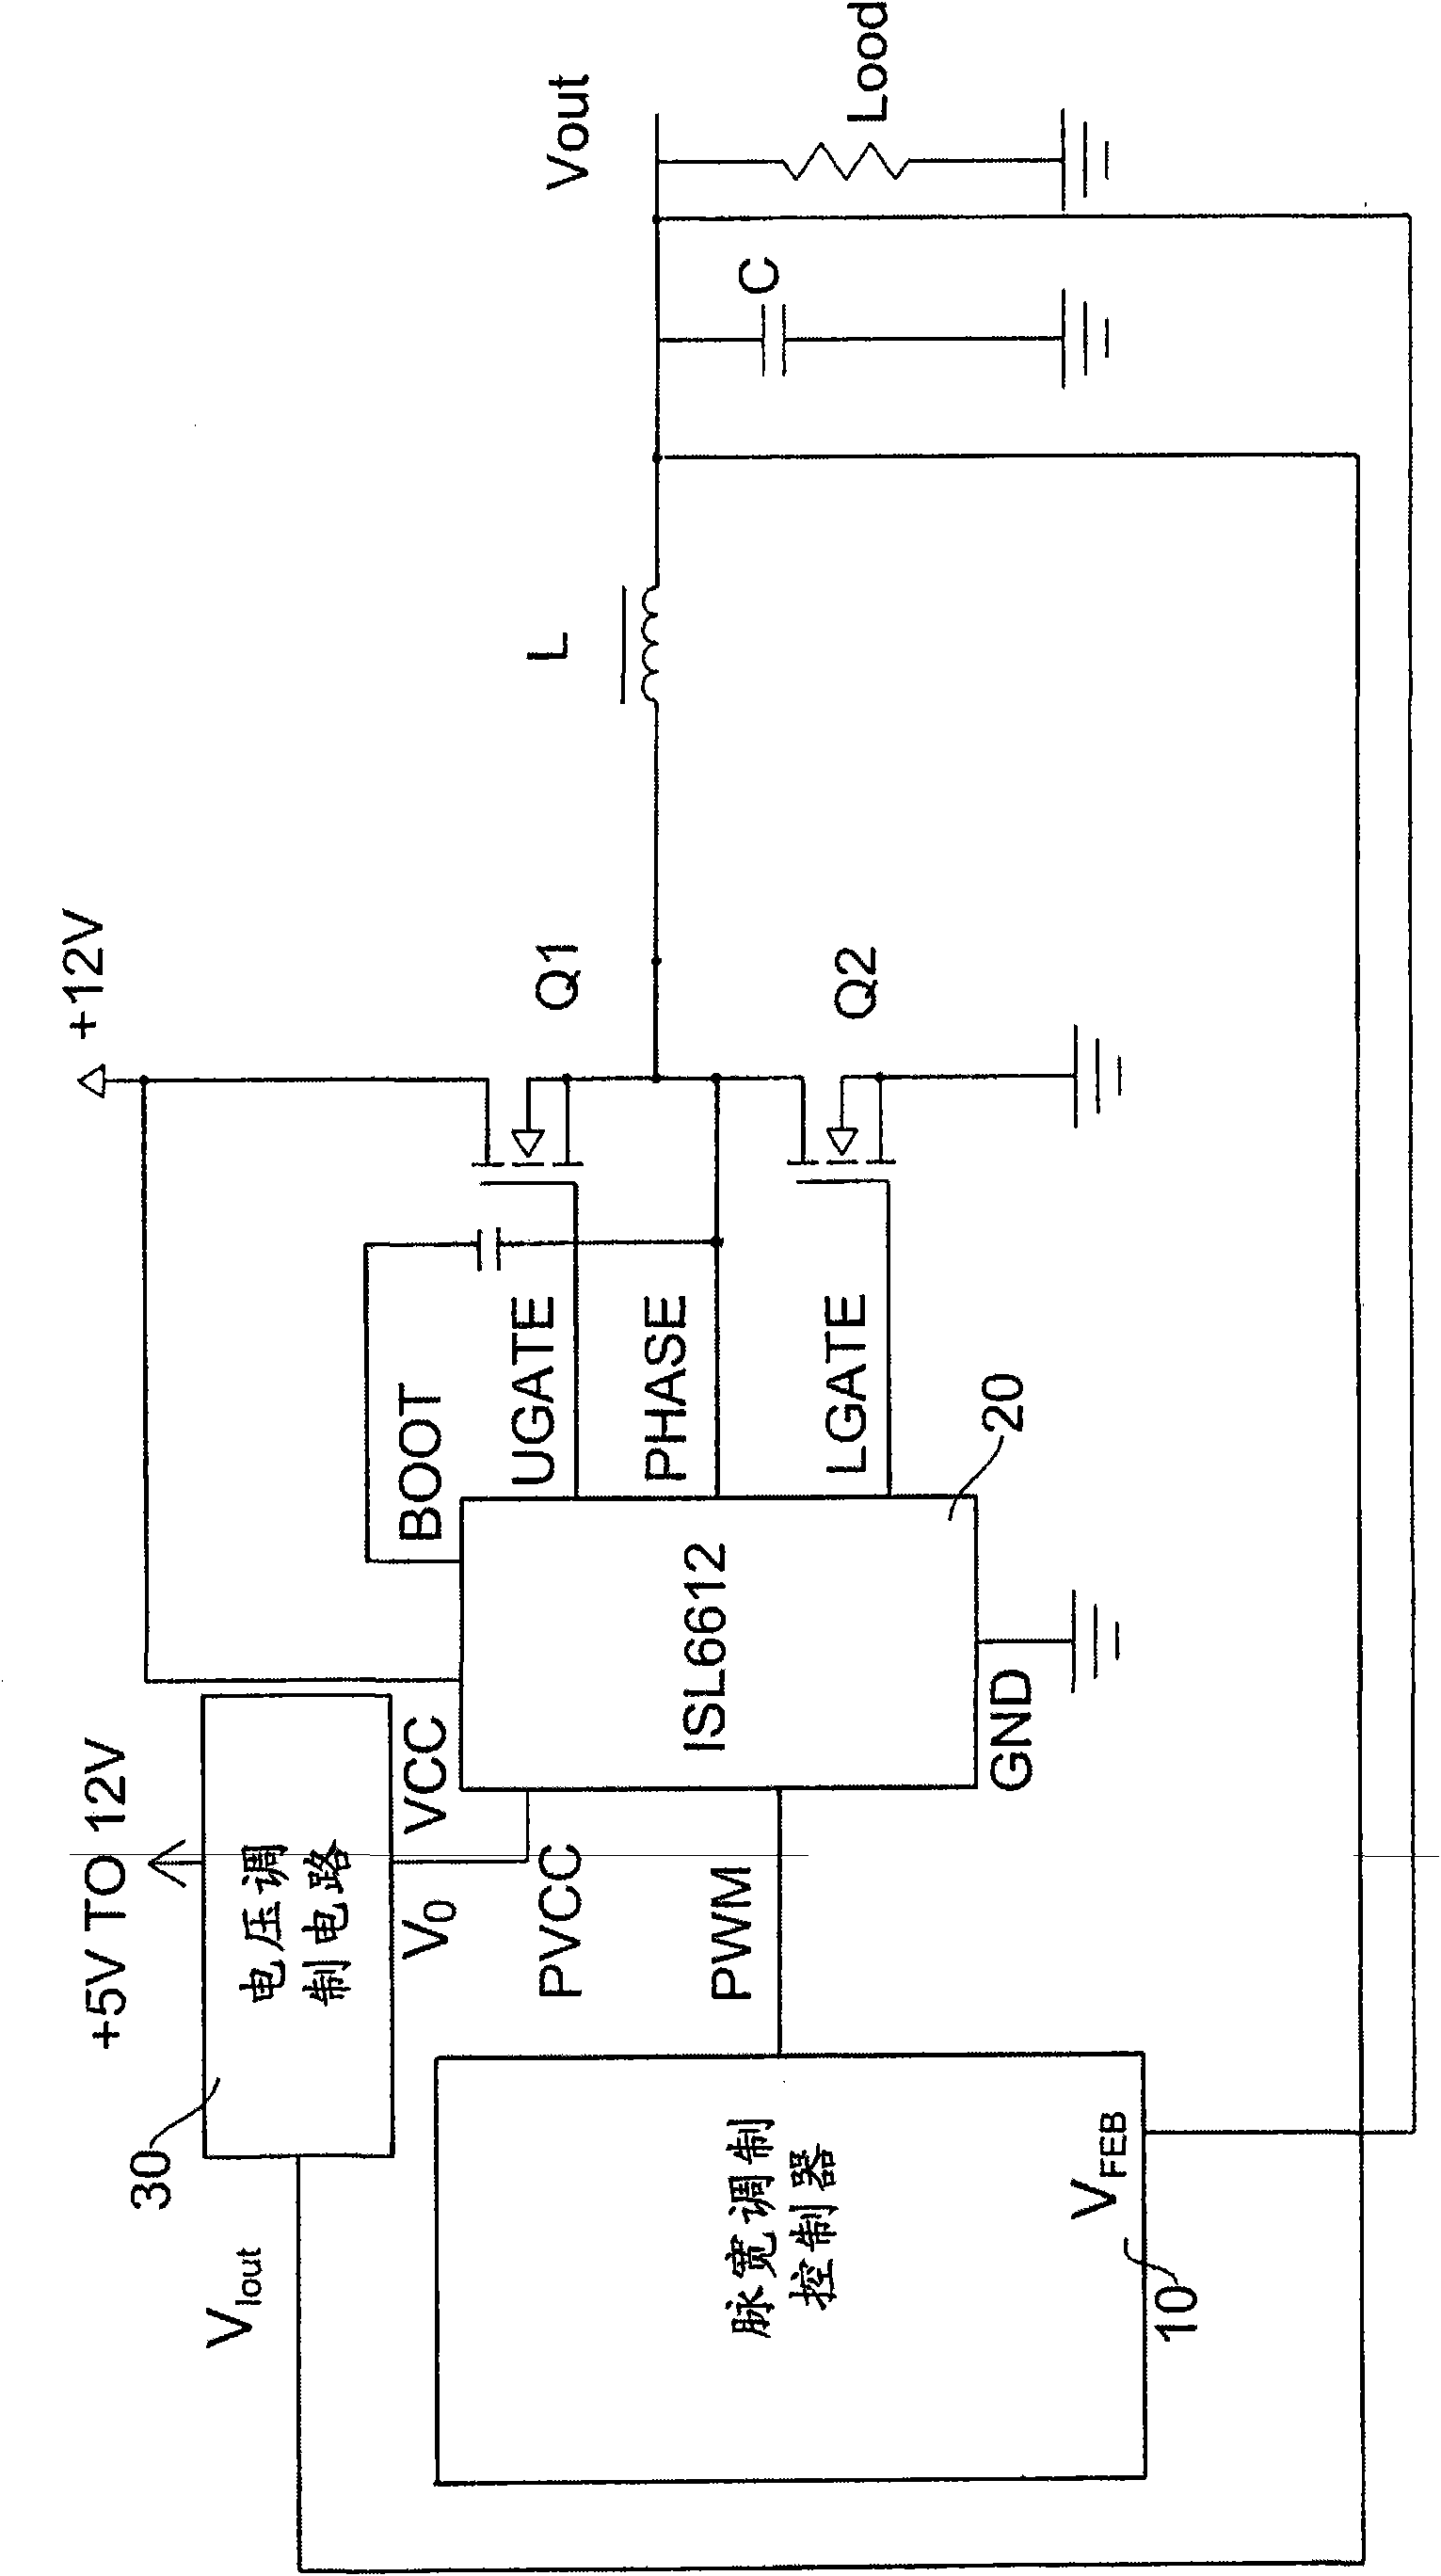 Voltage modulation circuit capable of increasing light load efficiency